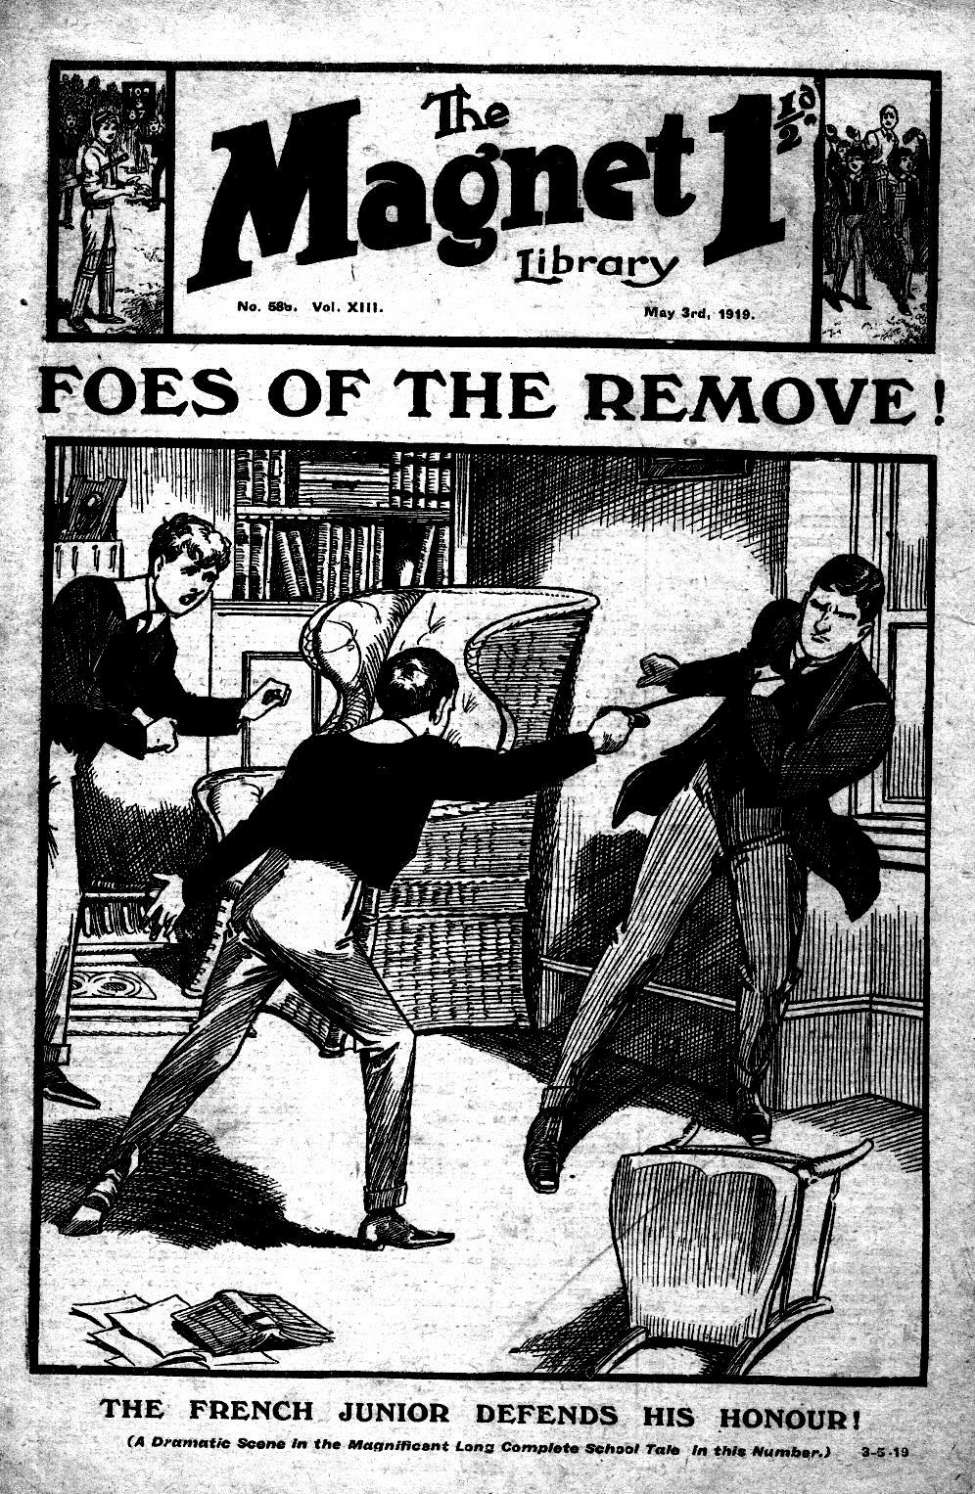 Book Cover For The Magnet 586 - Foes of the Remove